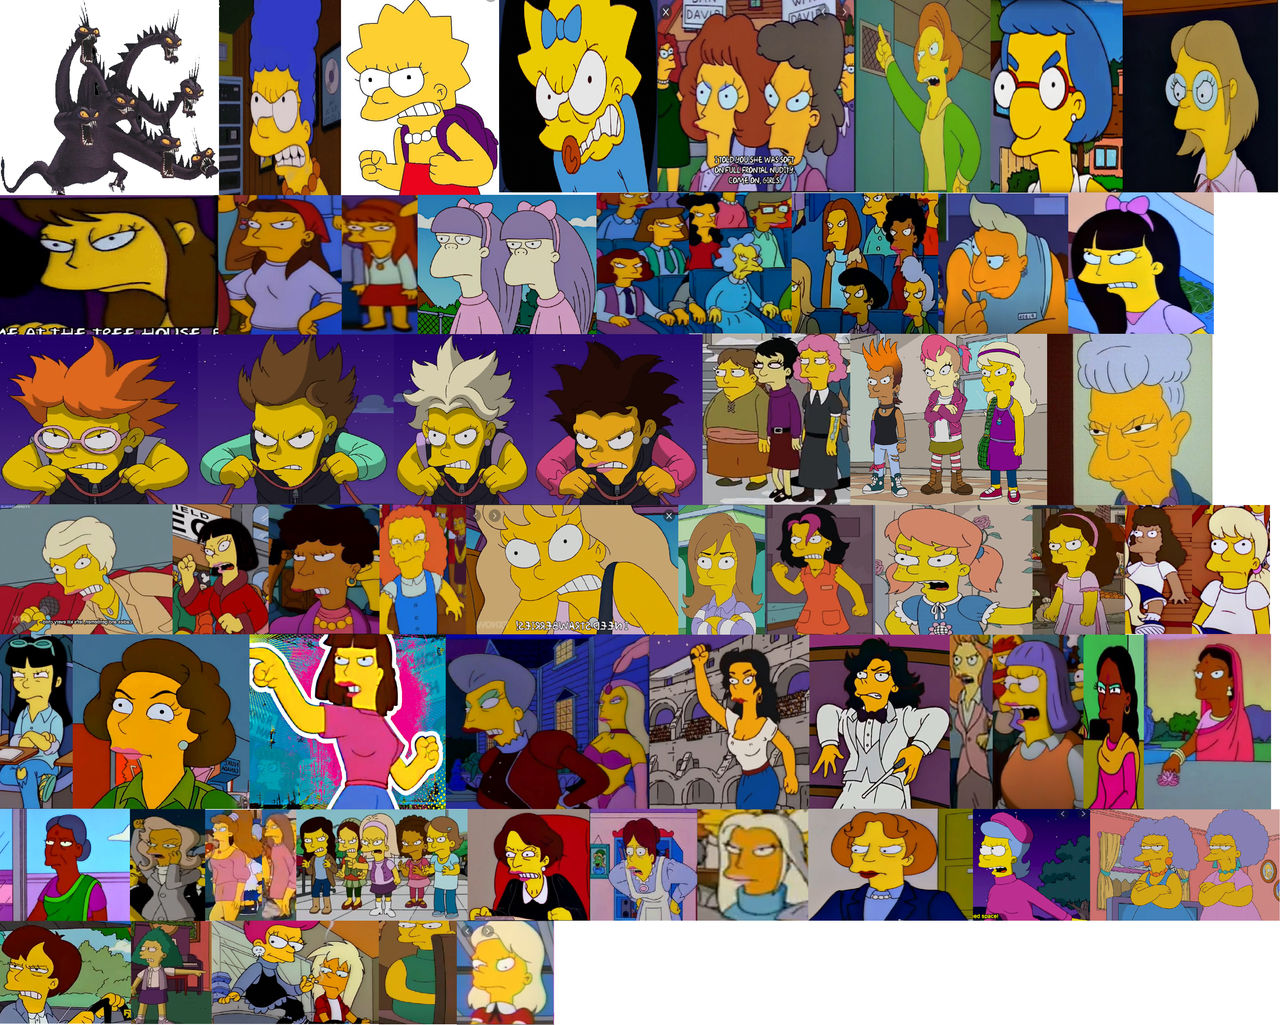 2. Marge Simpson from The Simpsons - wide 1